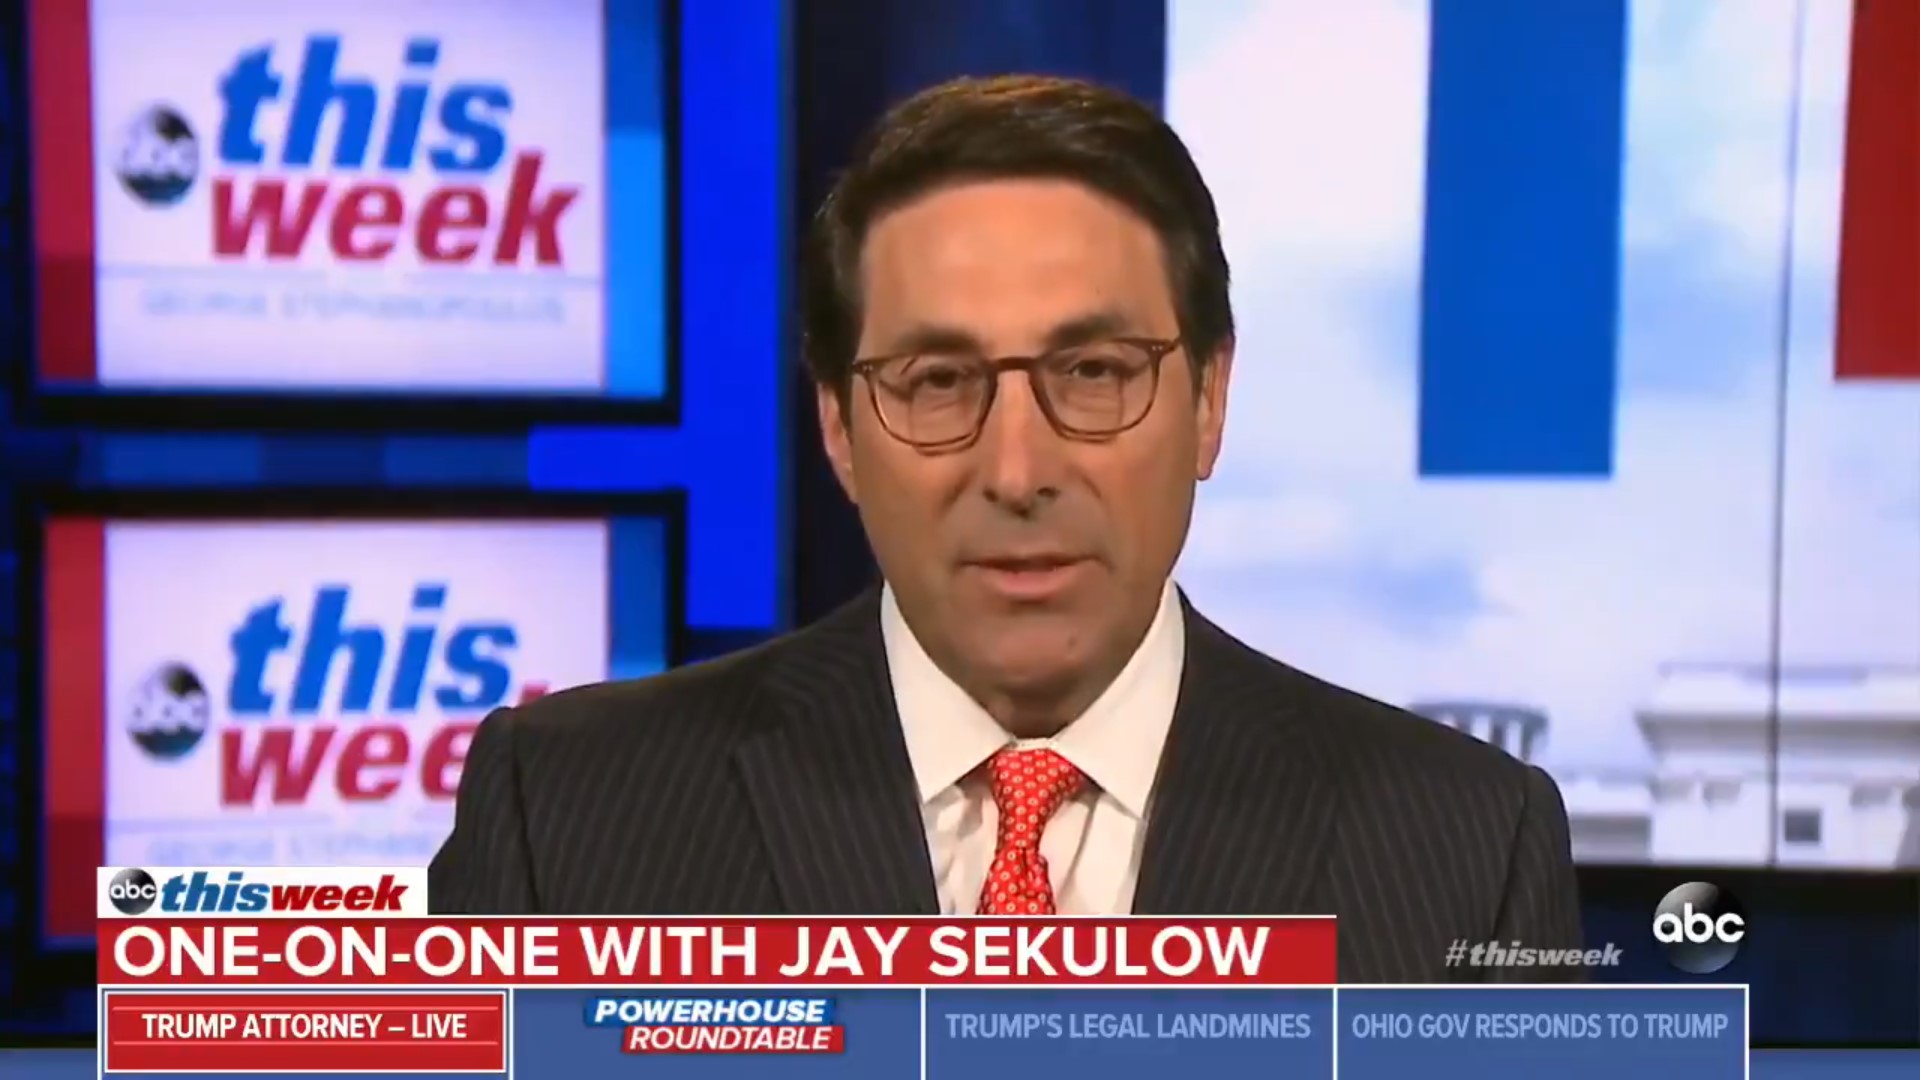 Jay Sekulow On His False Claims That Trump Didn’t Dictate Don Jr Statement: ‘I Had Bad Information’